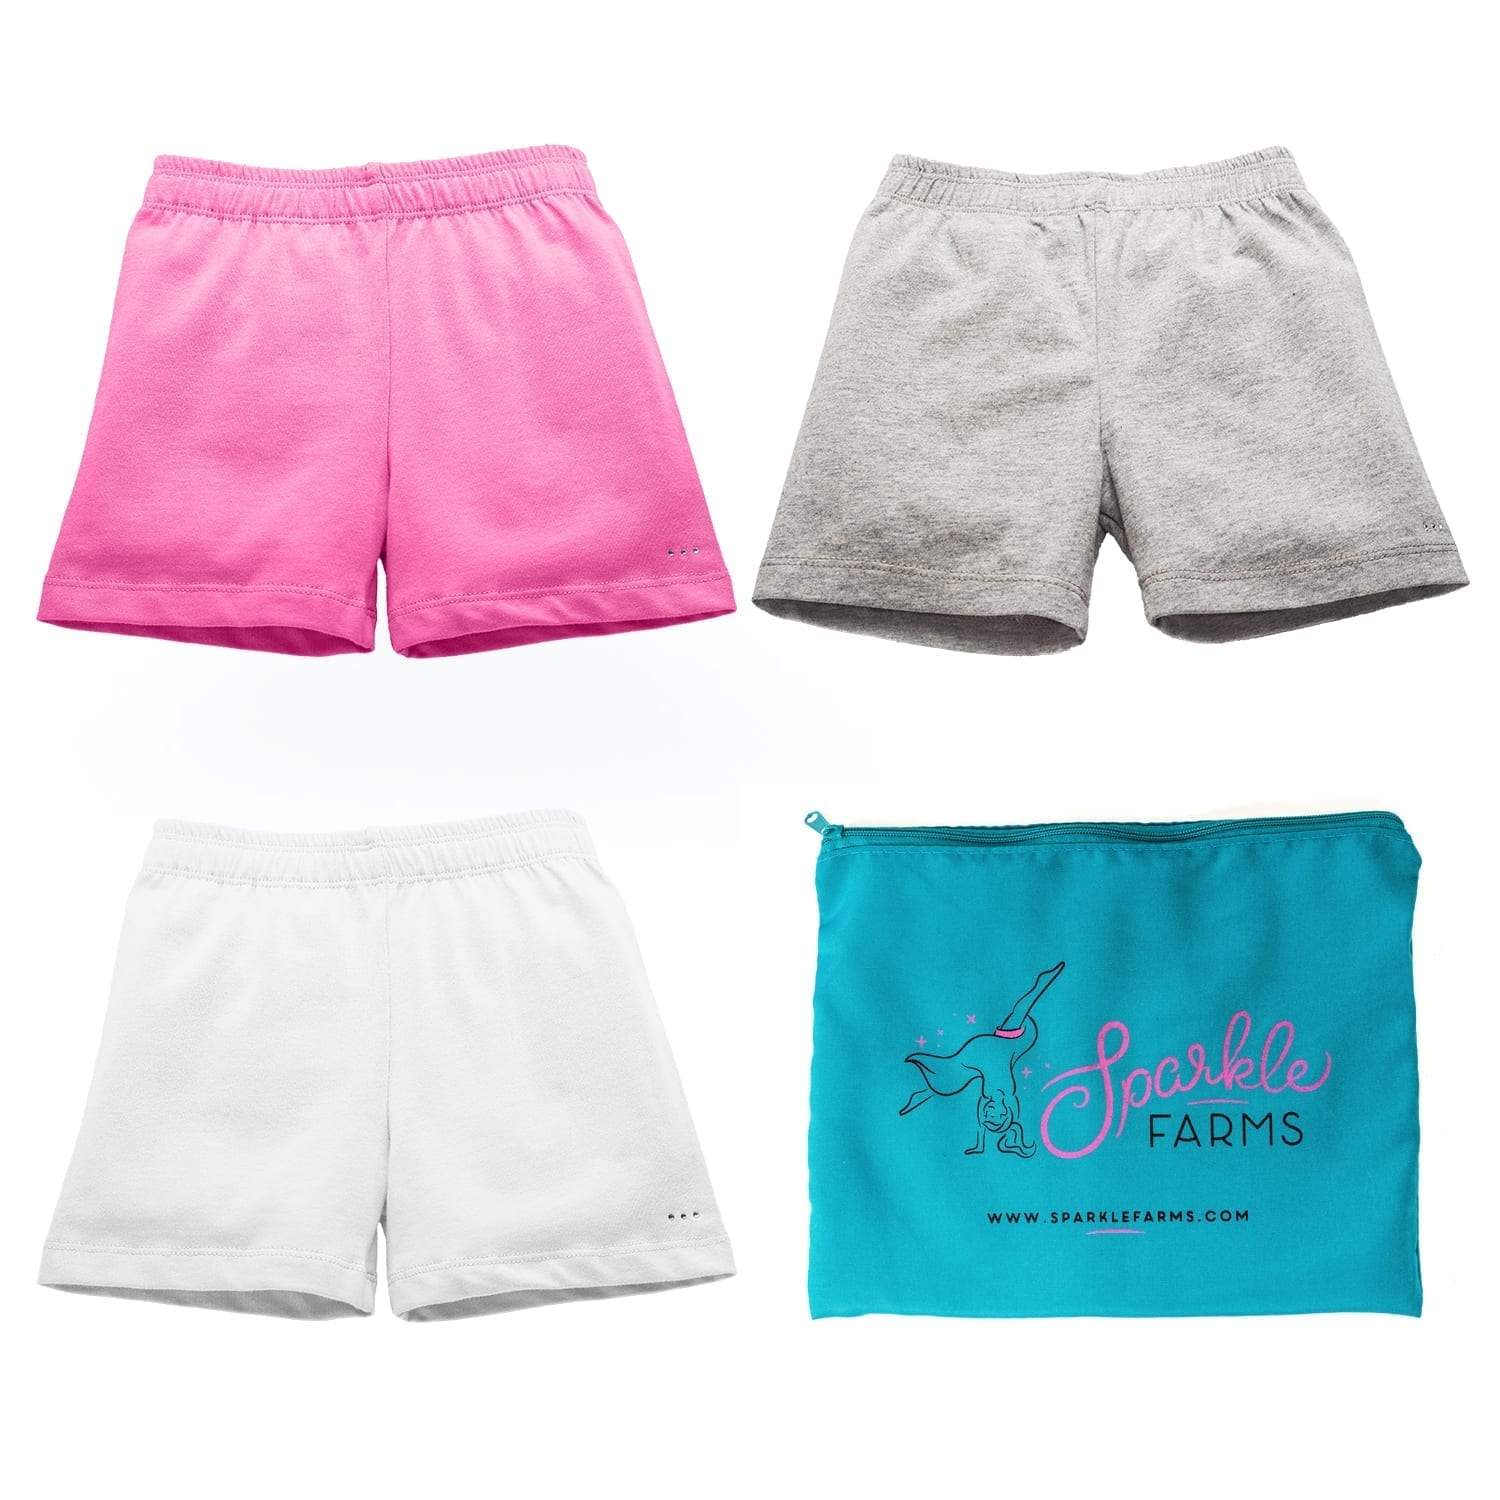 Personalized Under Dress Bike Shorts For Playground Modesty – Sparkle Farms  Apparel